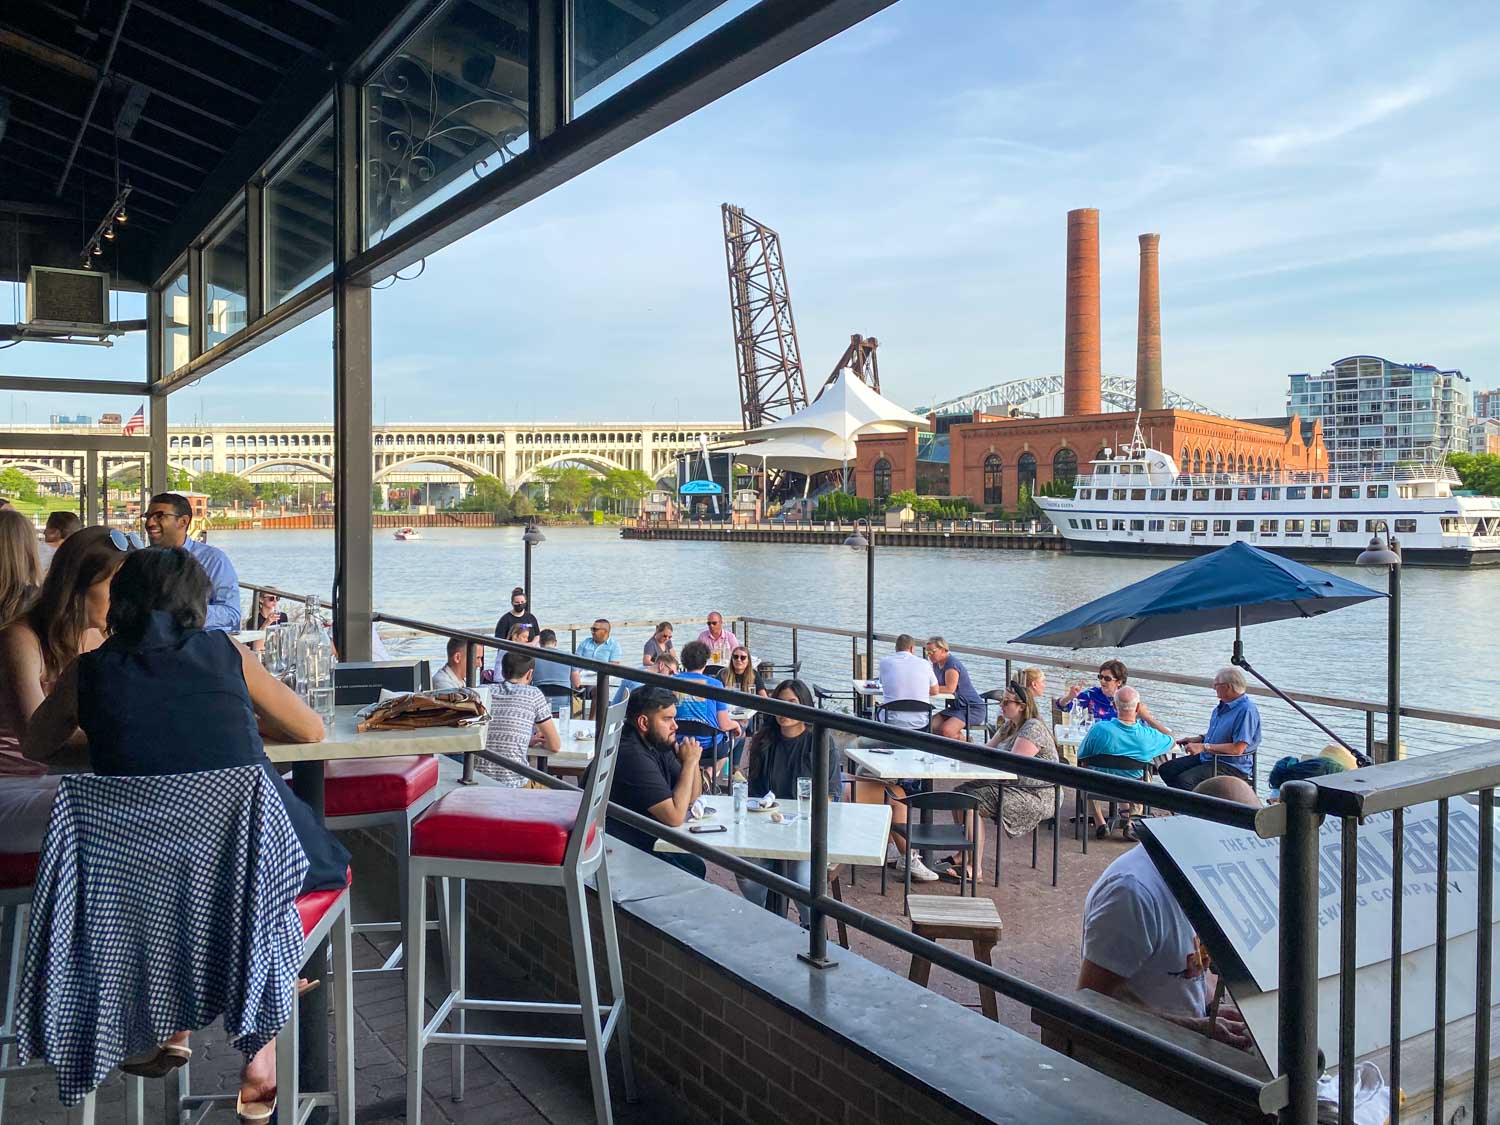 Cleveland Patios: 40 of the Best Patios in Cleveland to Enjoy in 2022